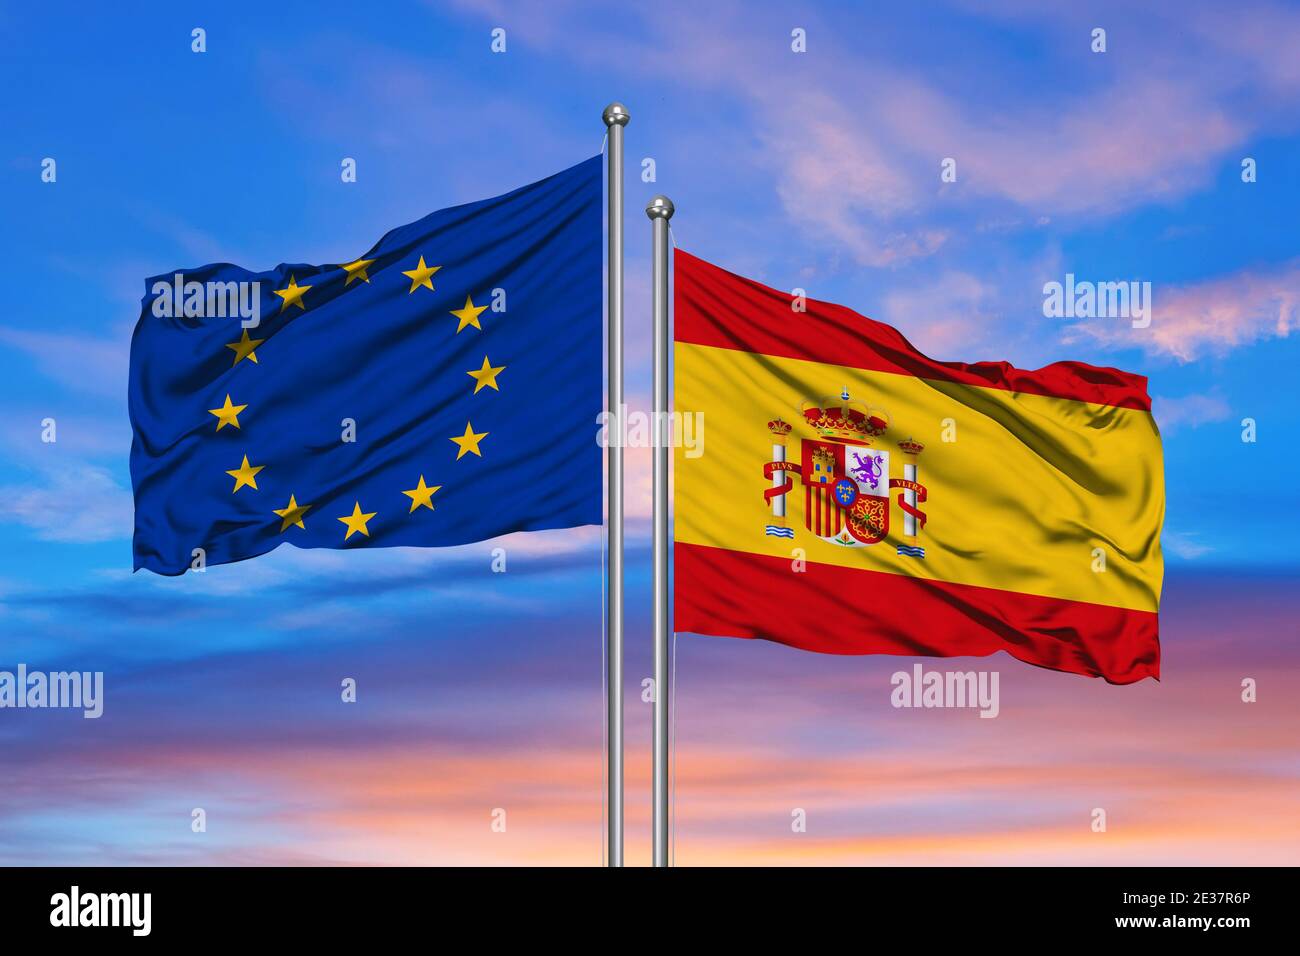 European Union and Spain flags together Stock Photo